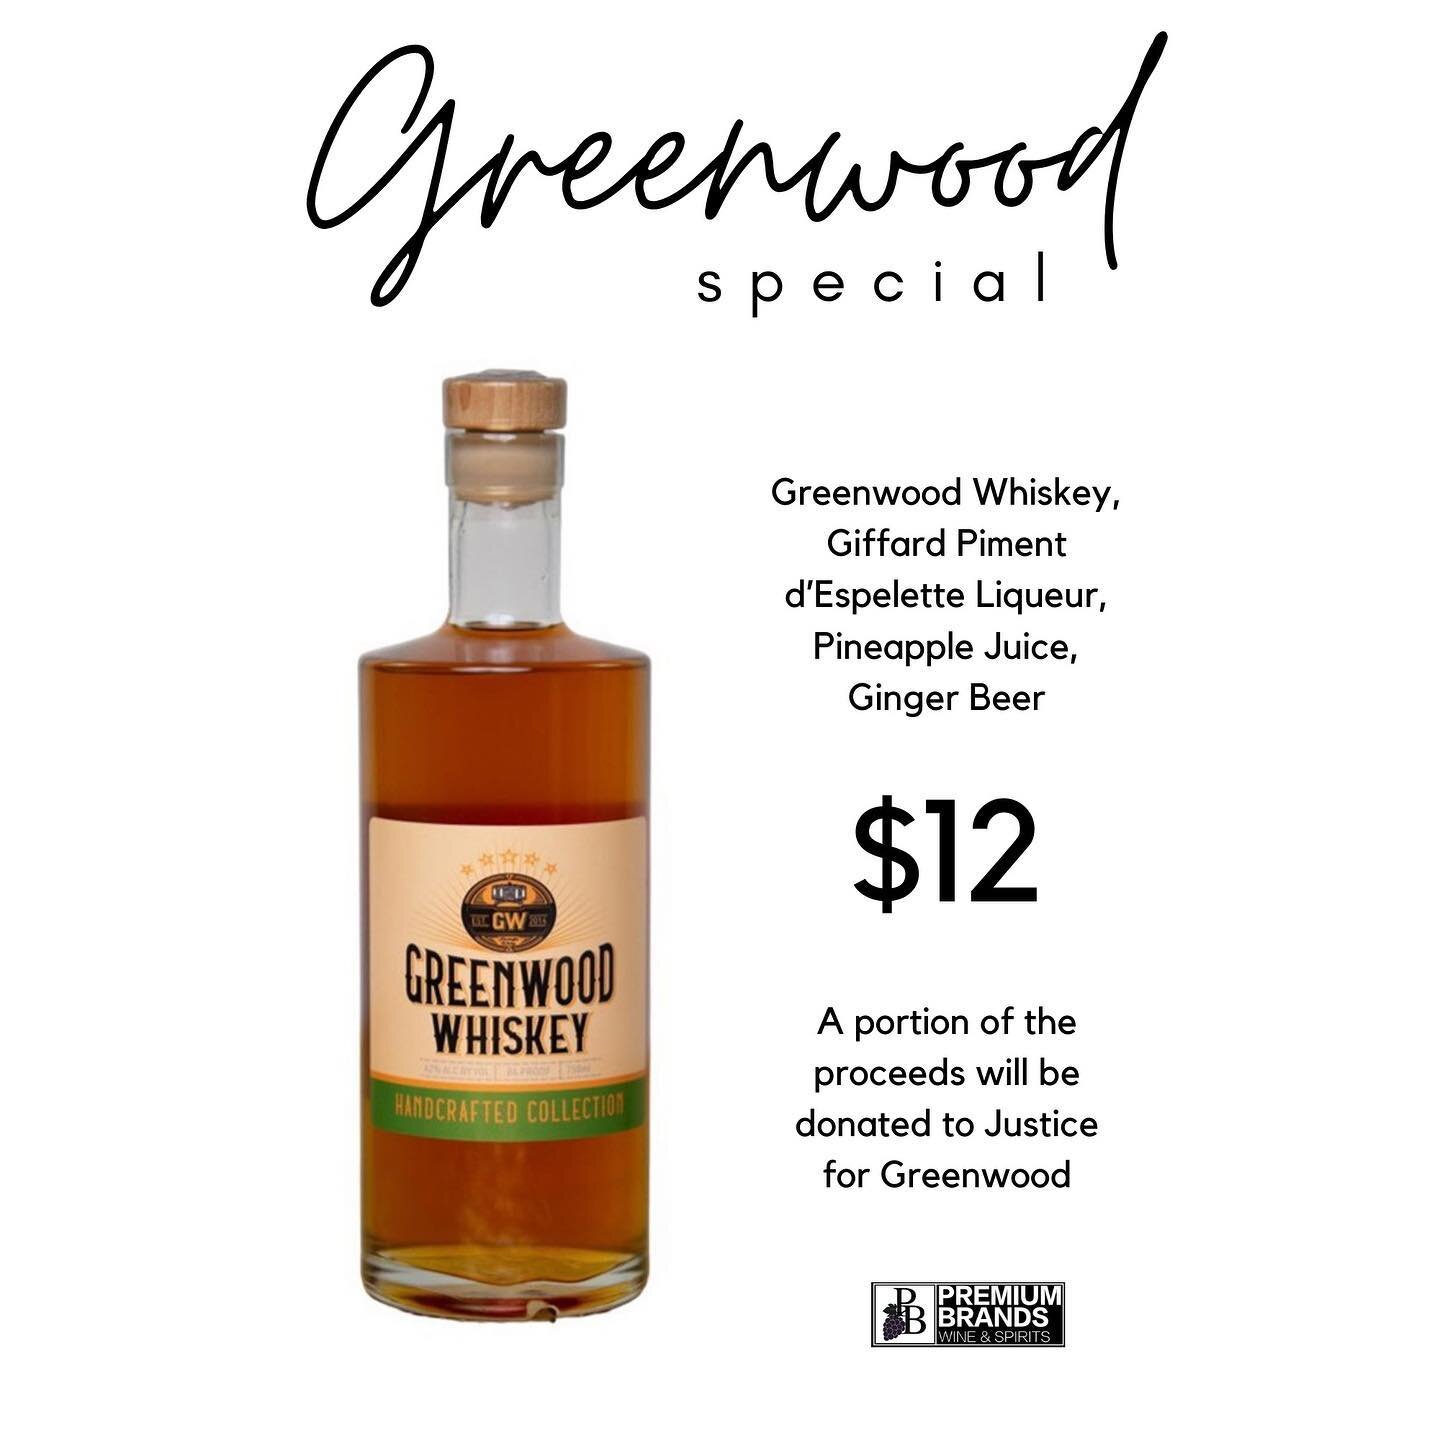 This weekend, in honor of their neighbors in the Greenwood District and the centennial of the Tulsa Race Massacre on May 31st June 1st, Duet is serving up a featured cocktail using Greenwood Whiskey! A portion of the proceeds from the cocktail to the